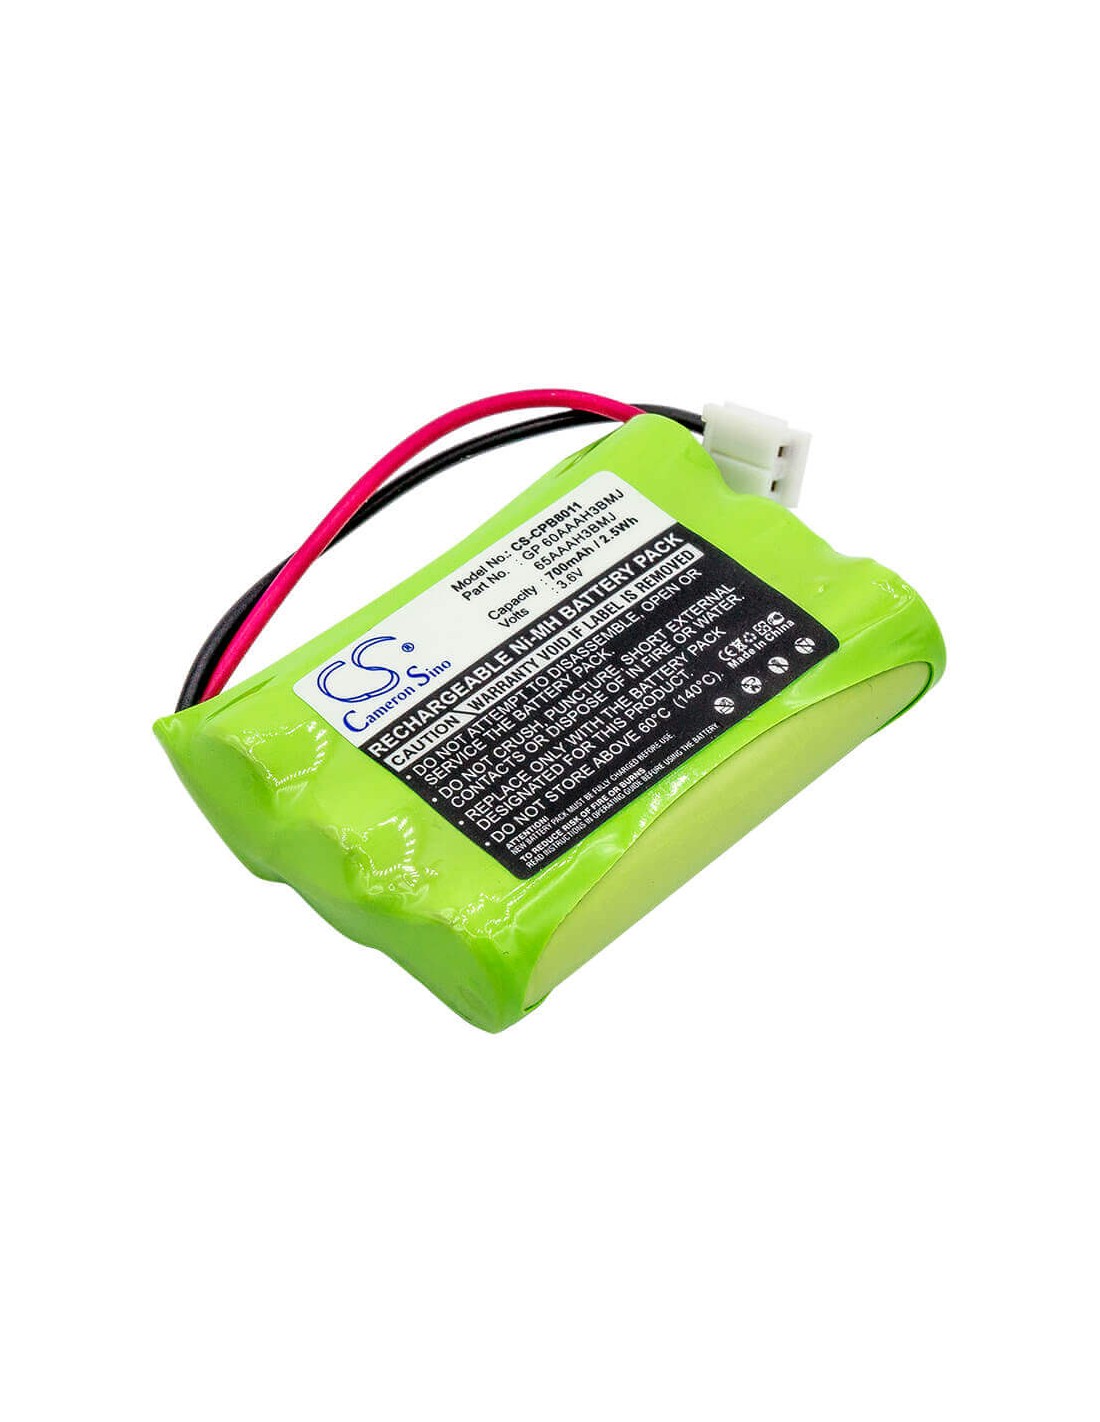 Battery for Cable & Wireless, Cwr 2200 3.6V, 700mAh - 2.52Wh